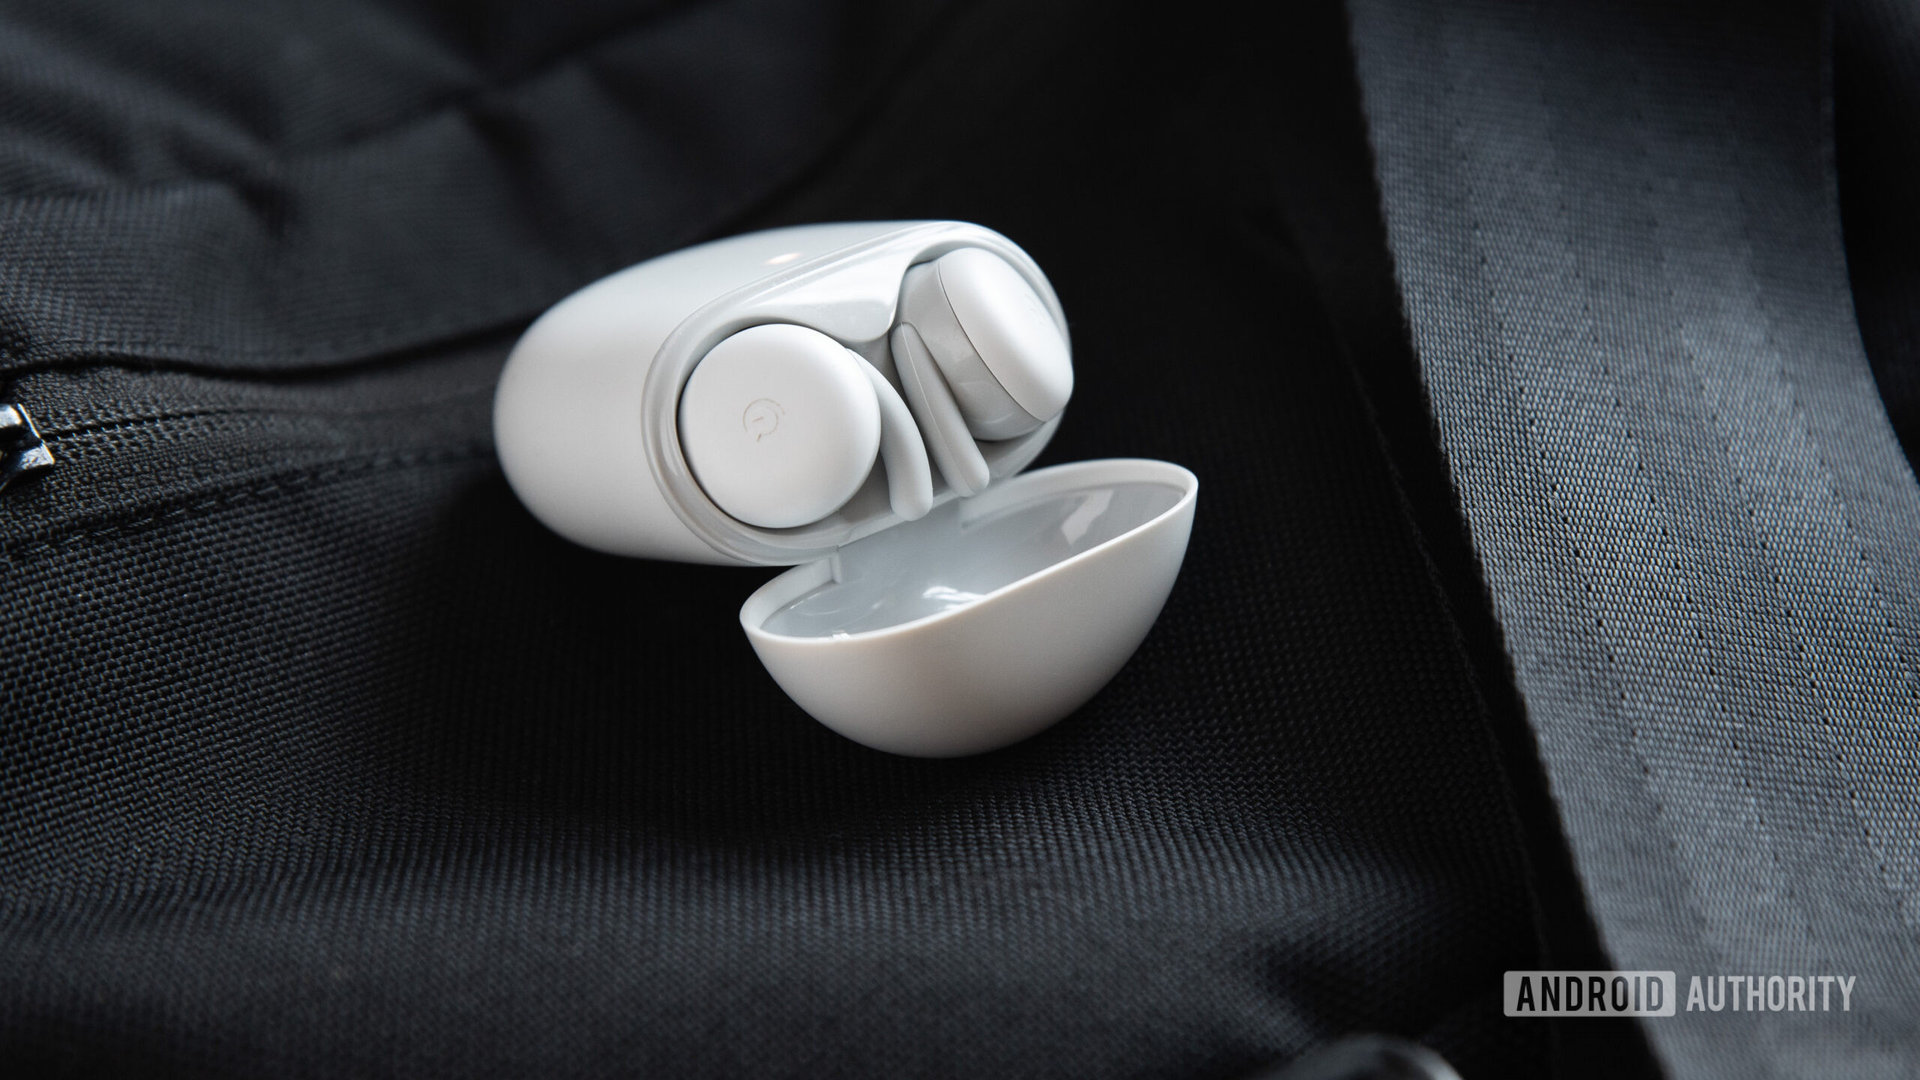 The Google Pixel Buds A-Series earbuds in the open case.